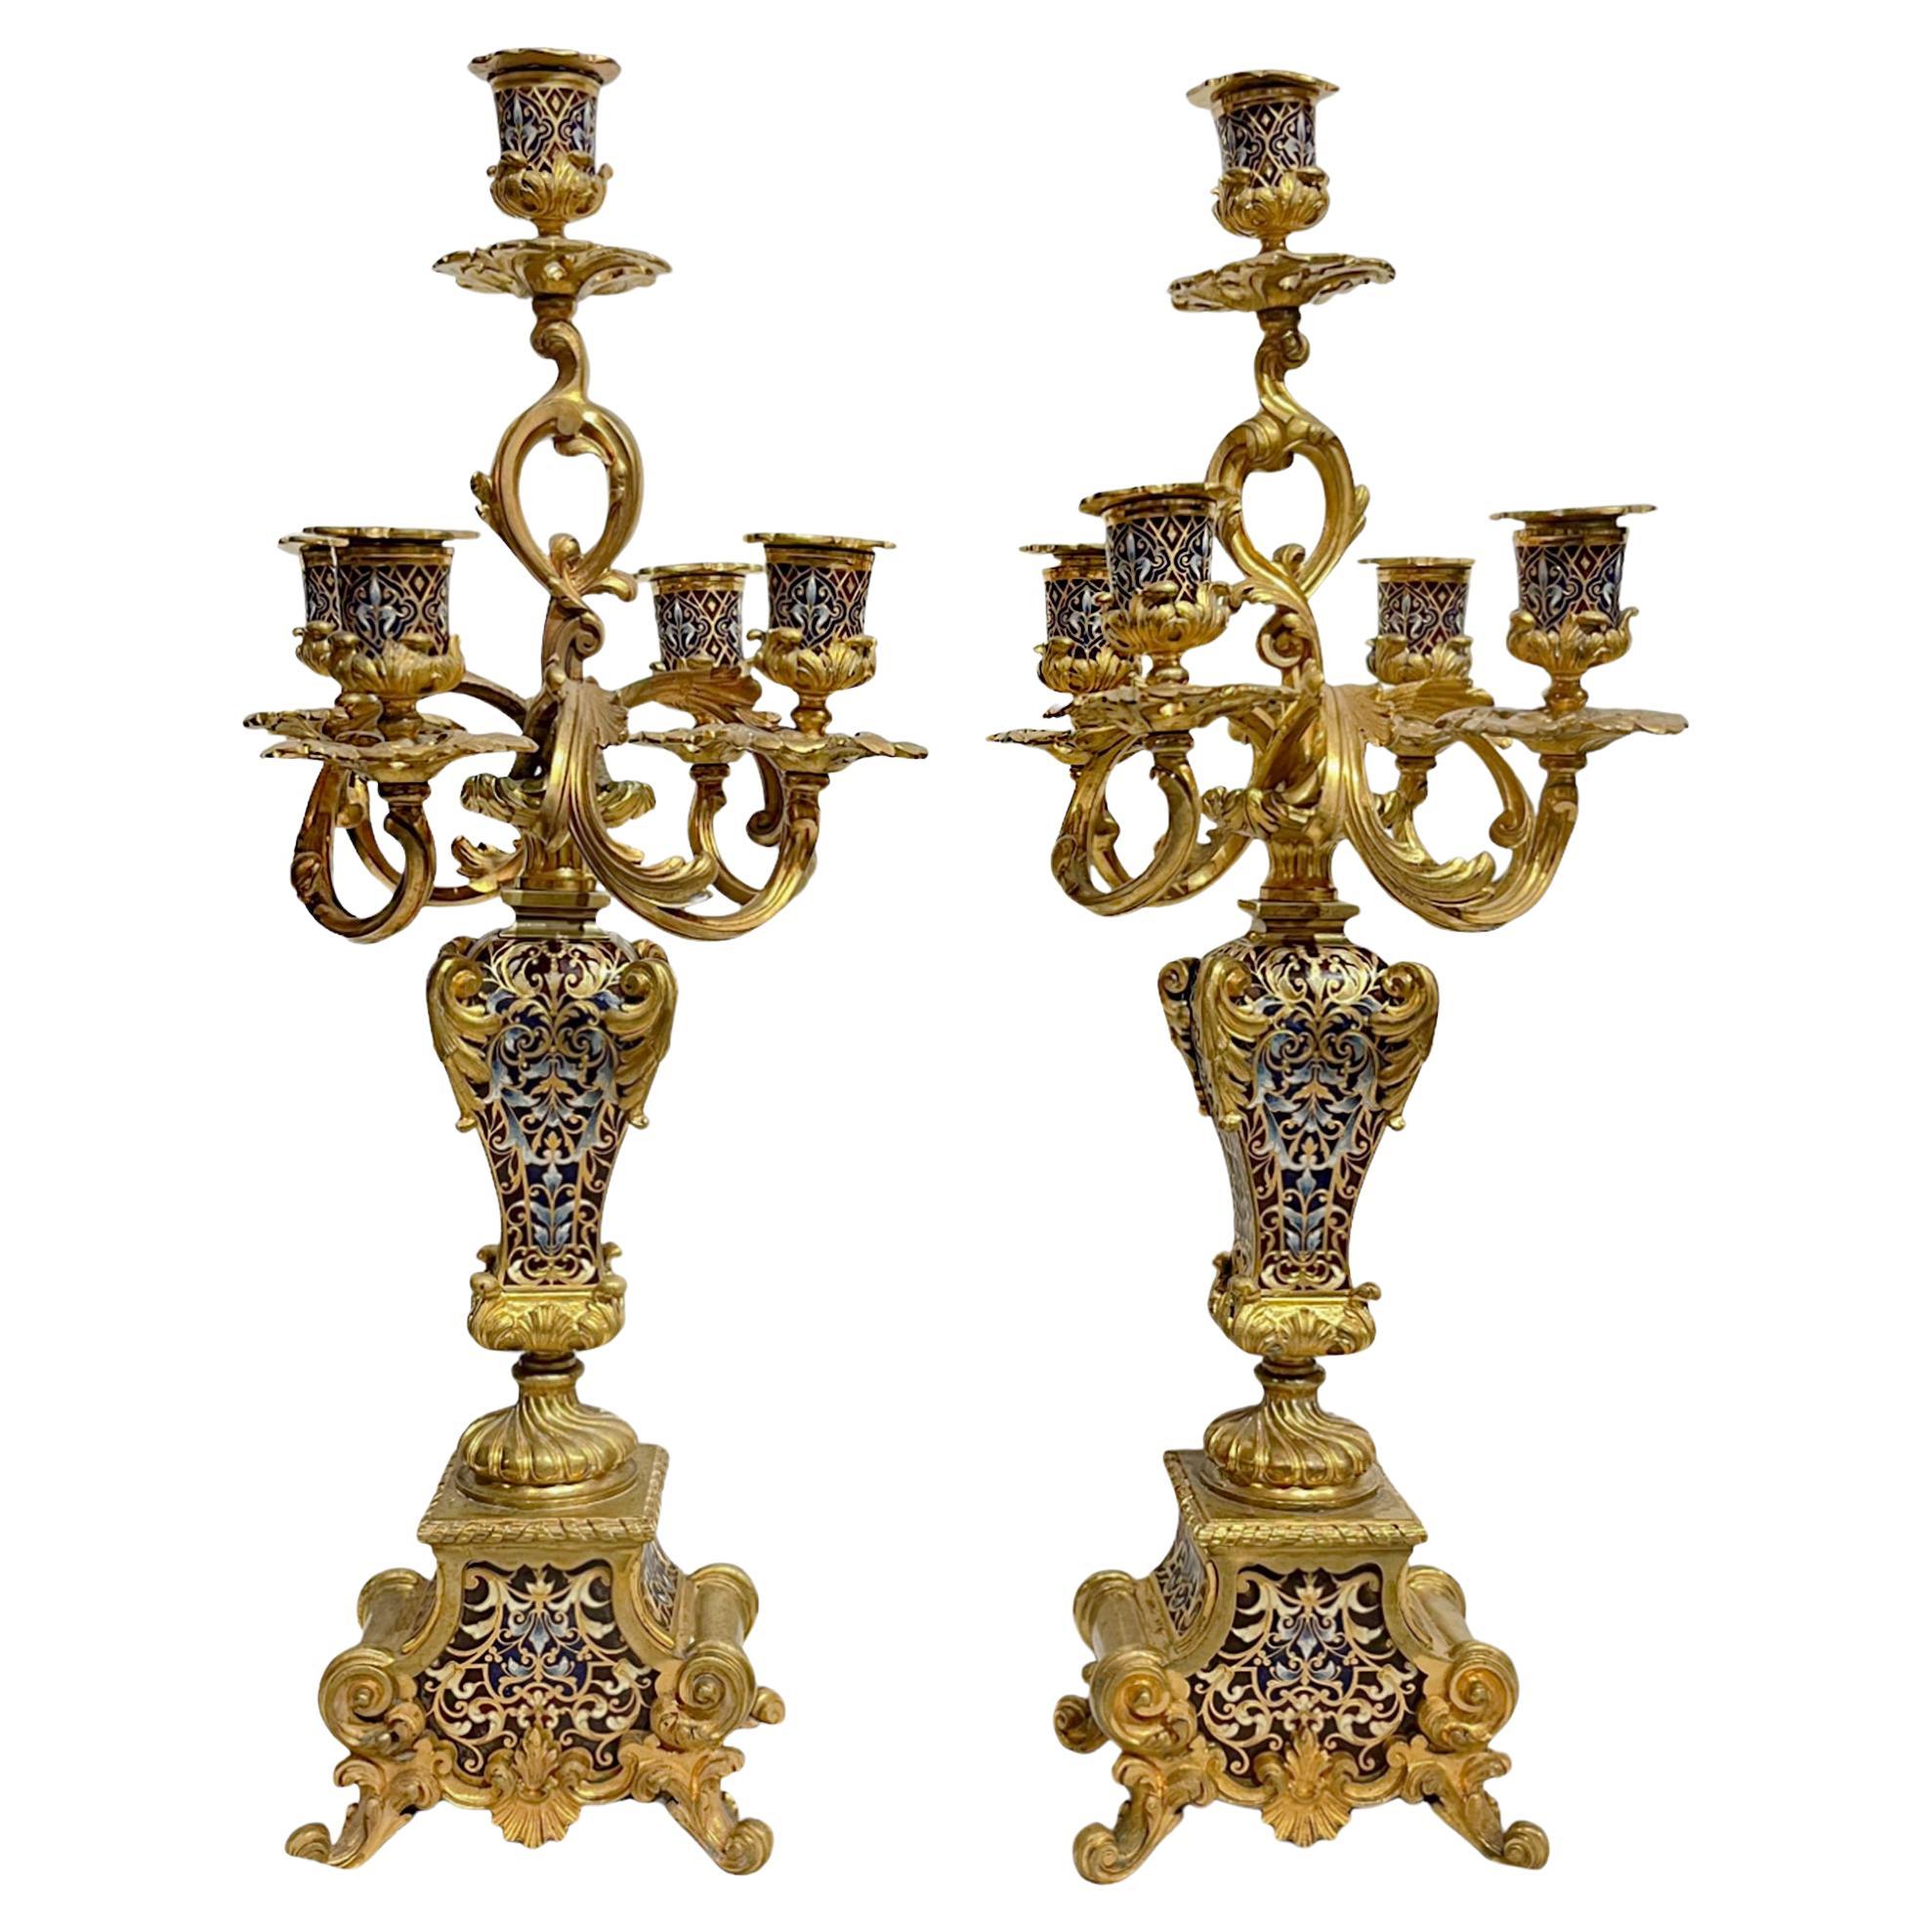 Pair of Champlevé and Gilt-bronze Five-light Candelabra For Sale